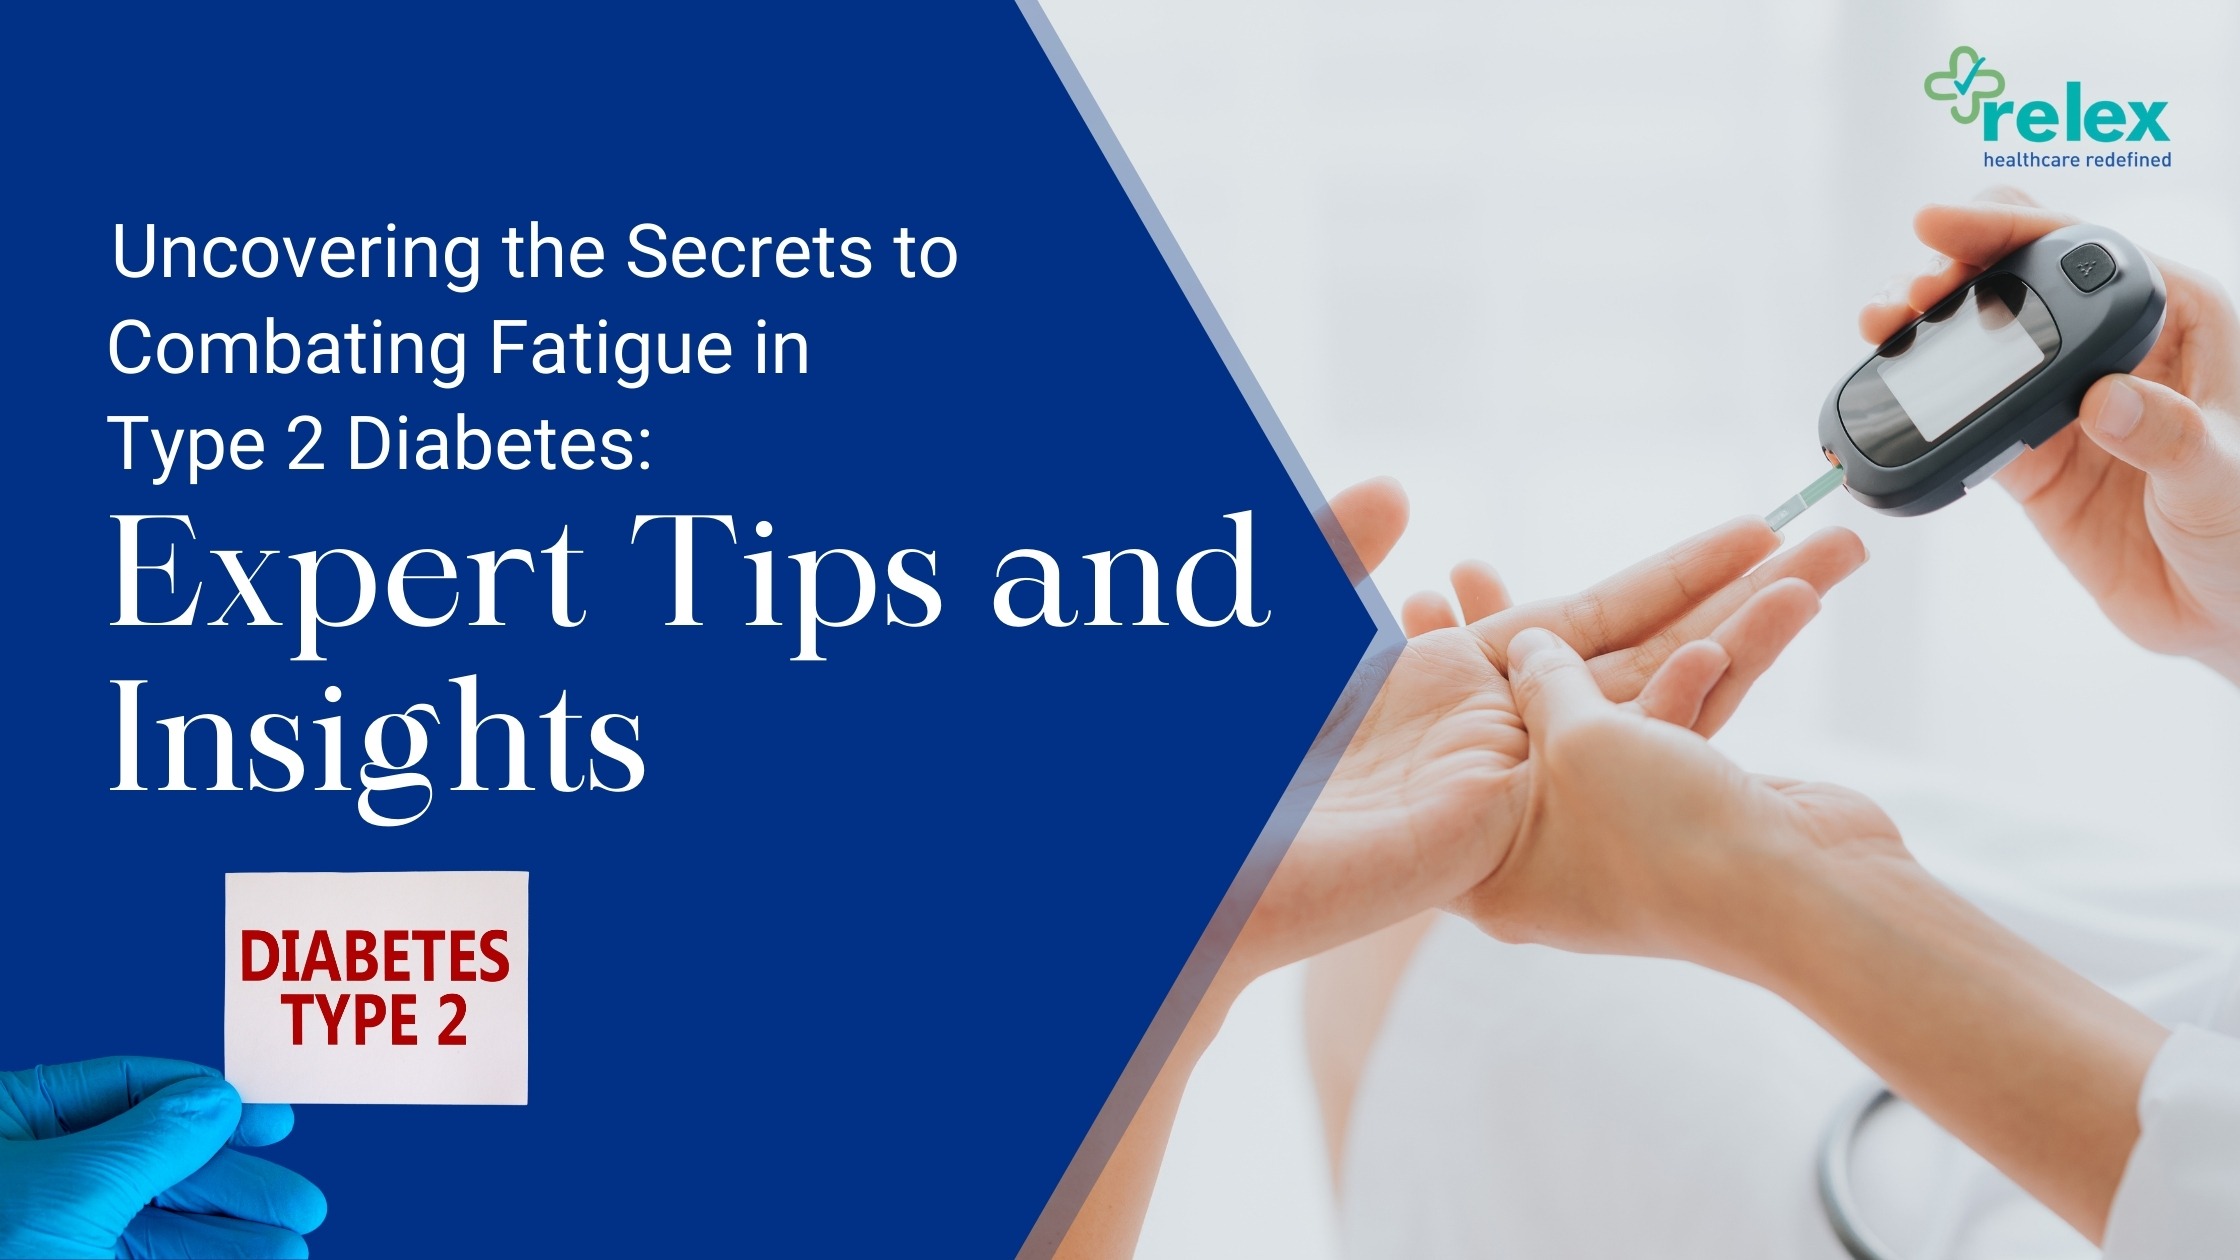 Uncovering the Secrets to Combating Fatigue in Type 2 Diabetes: Expert Tips and Insights